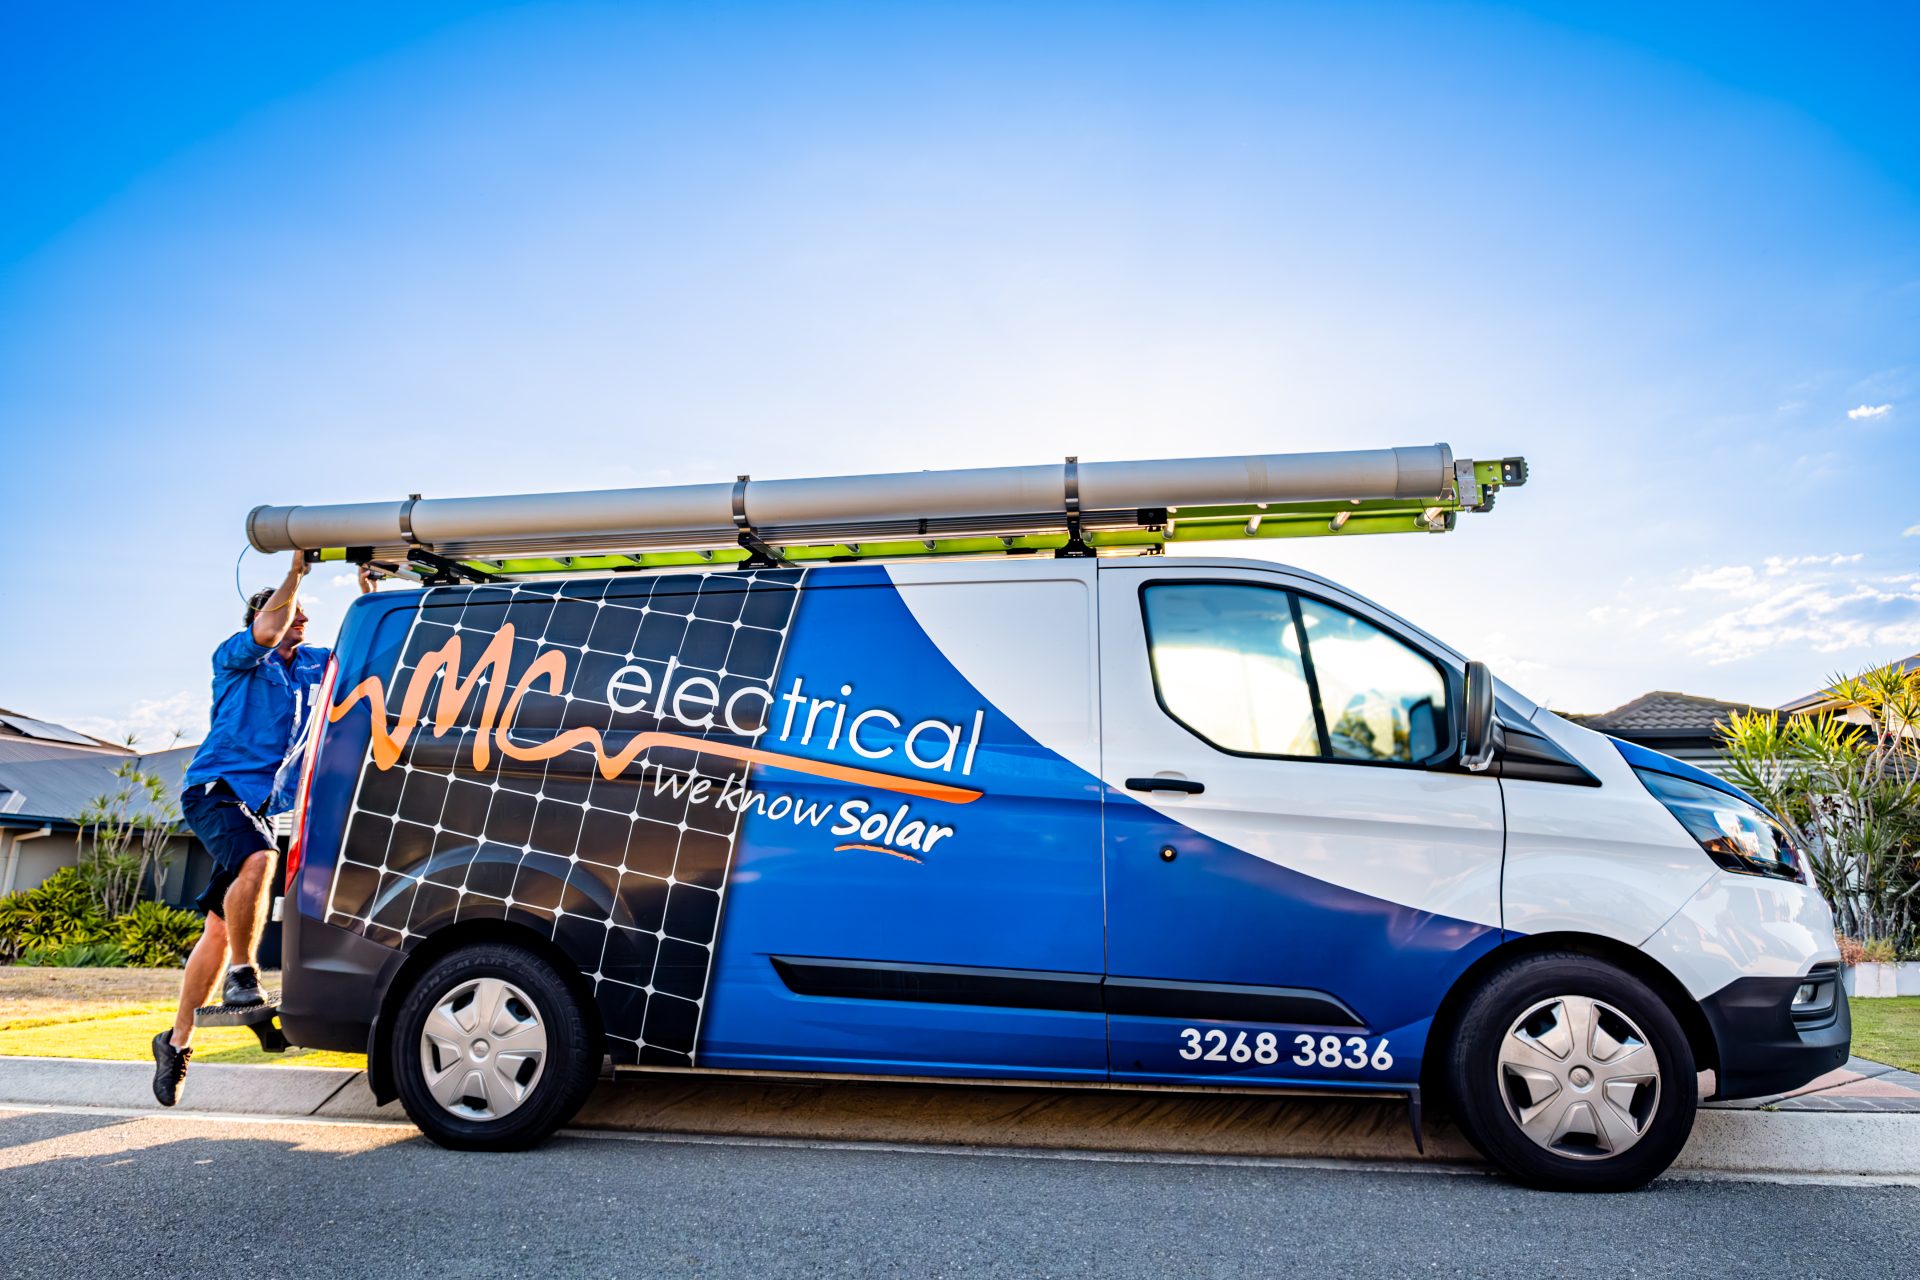 MC electrical on van with solar panels